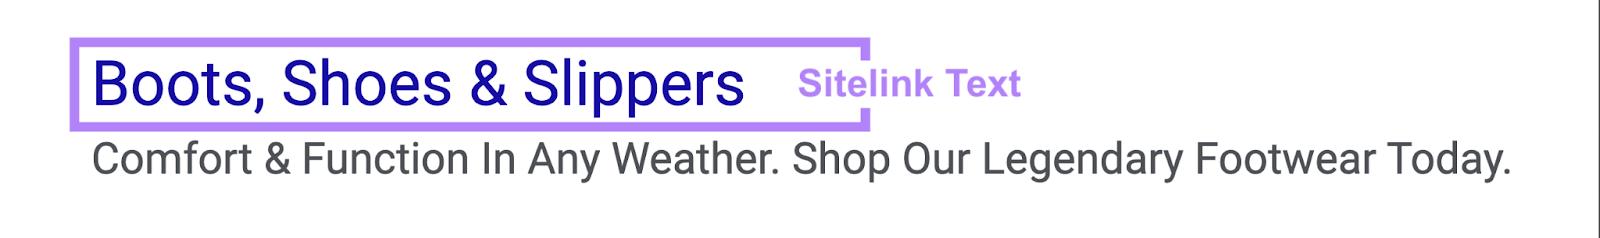 Sitelink text that reads "Boots, Shoes & Slippers"